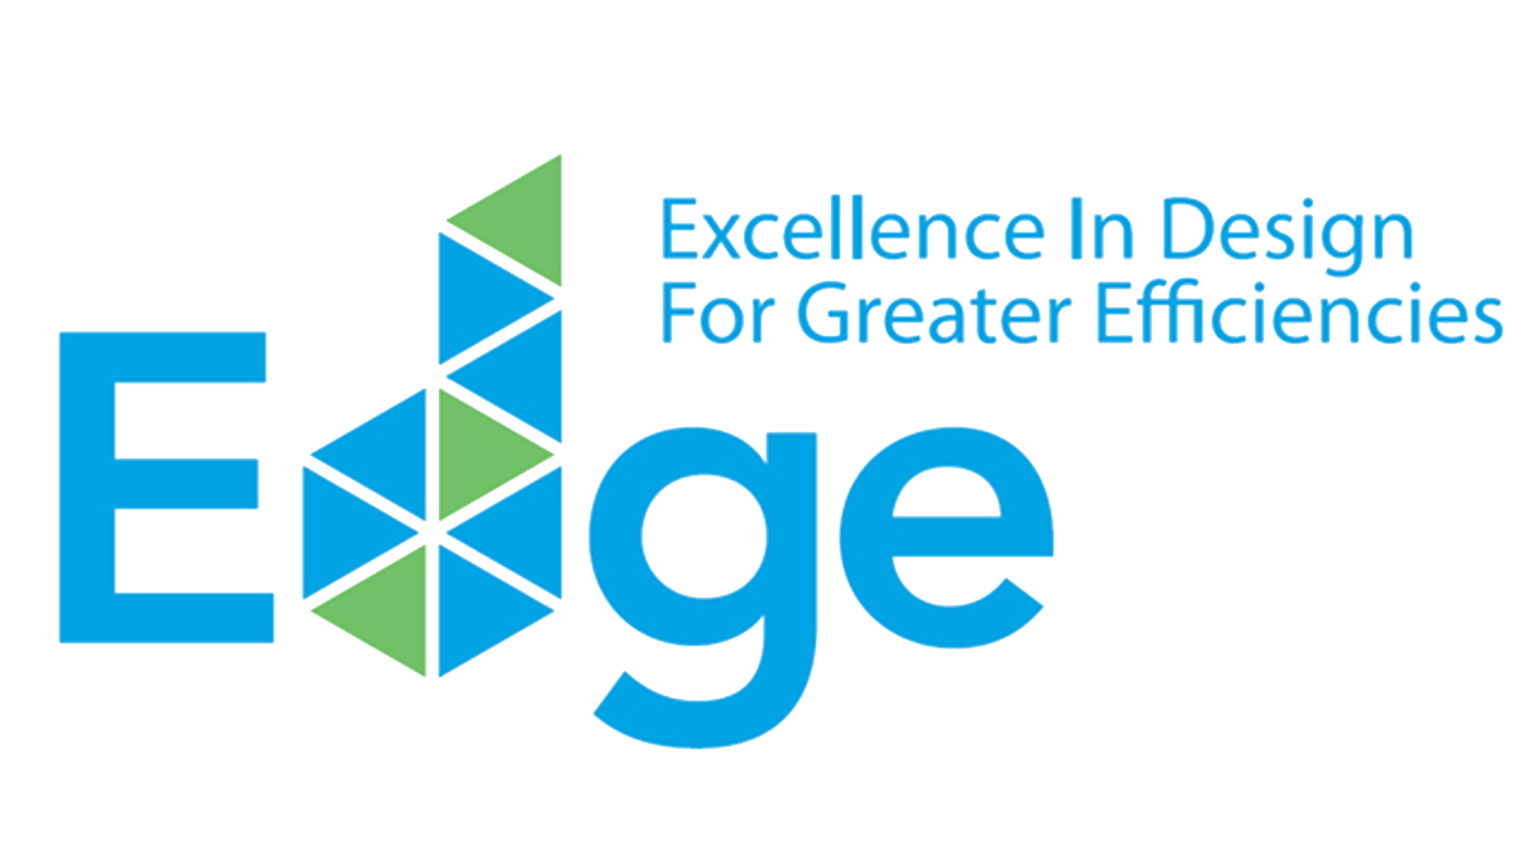 Edge Excellence in Design for Greater Efficiencies